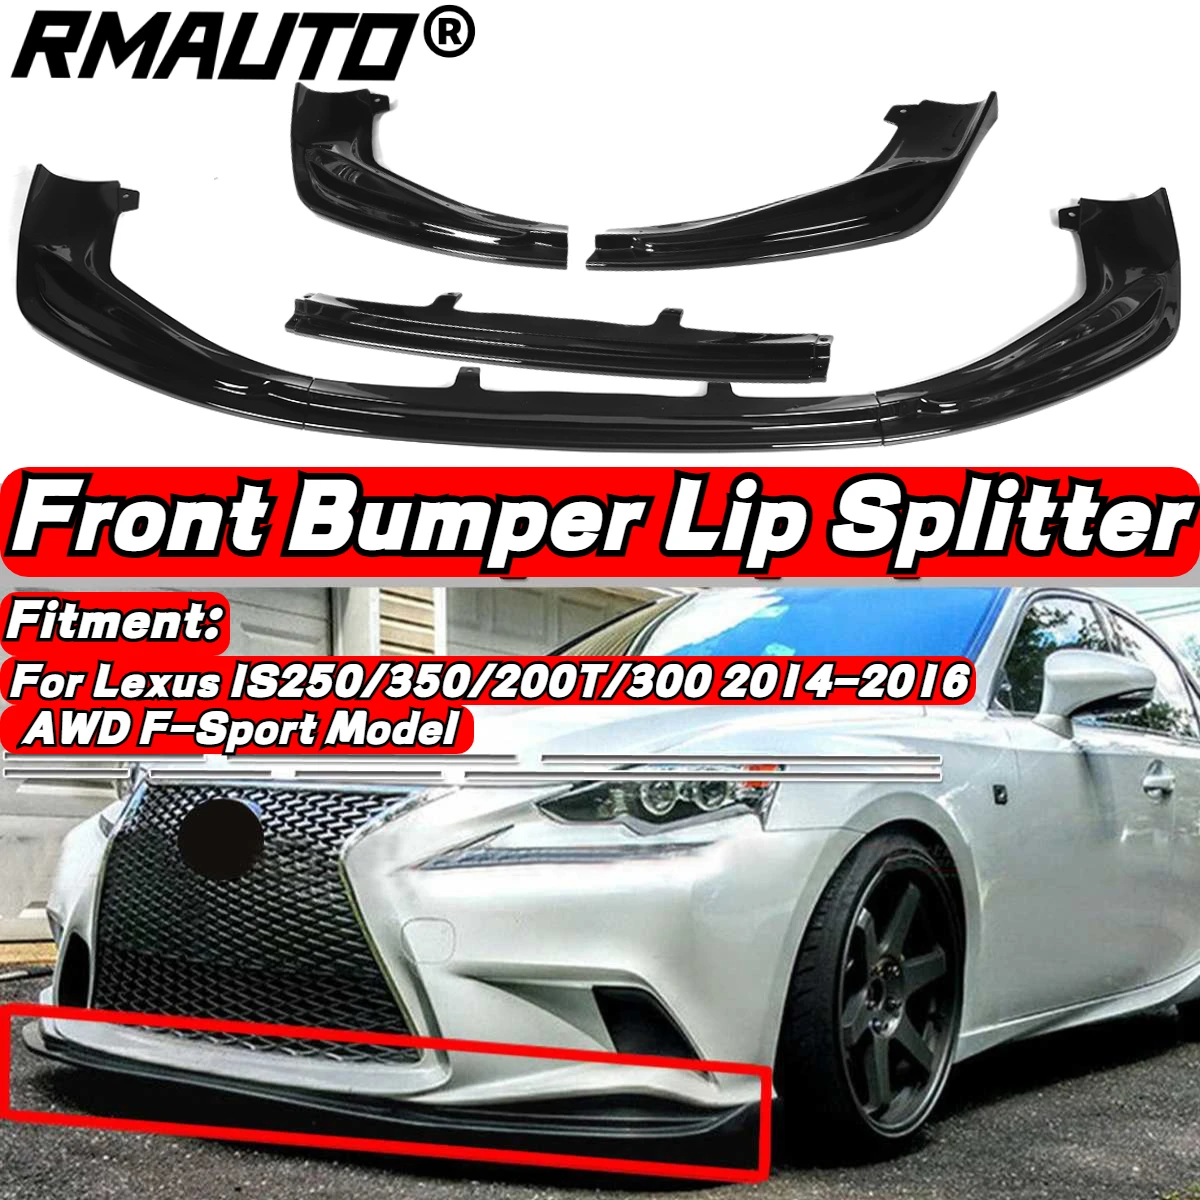 

RMAUTO Car Front Bumper Splitter Lip Diffuser Protector Spoiler Chin Body Kit For Lexus IS250 IS350 IS300 F-Sport 2014-2016